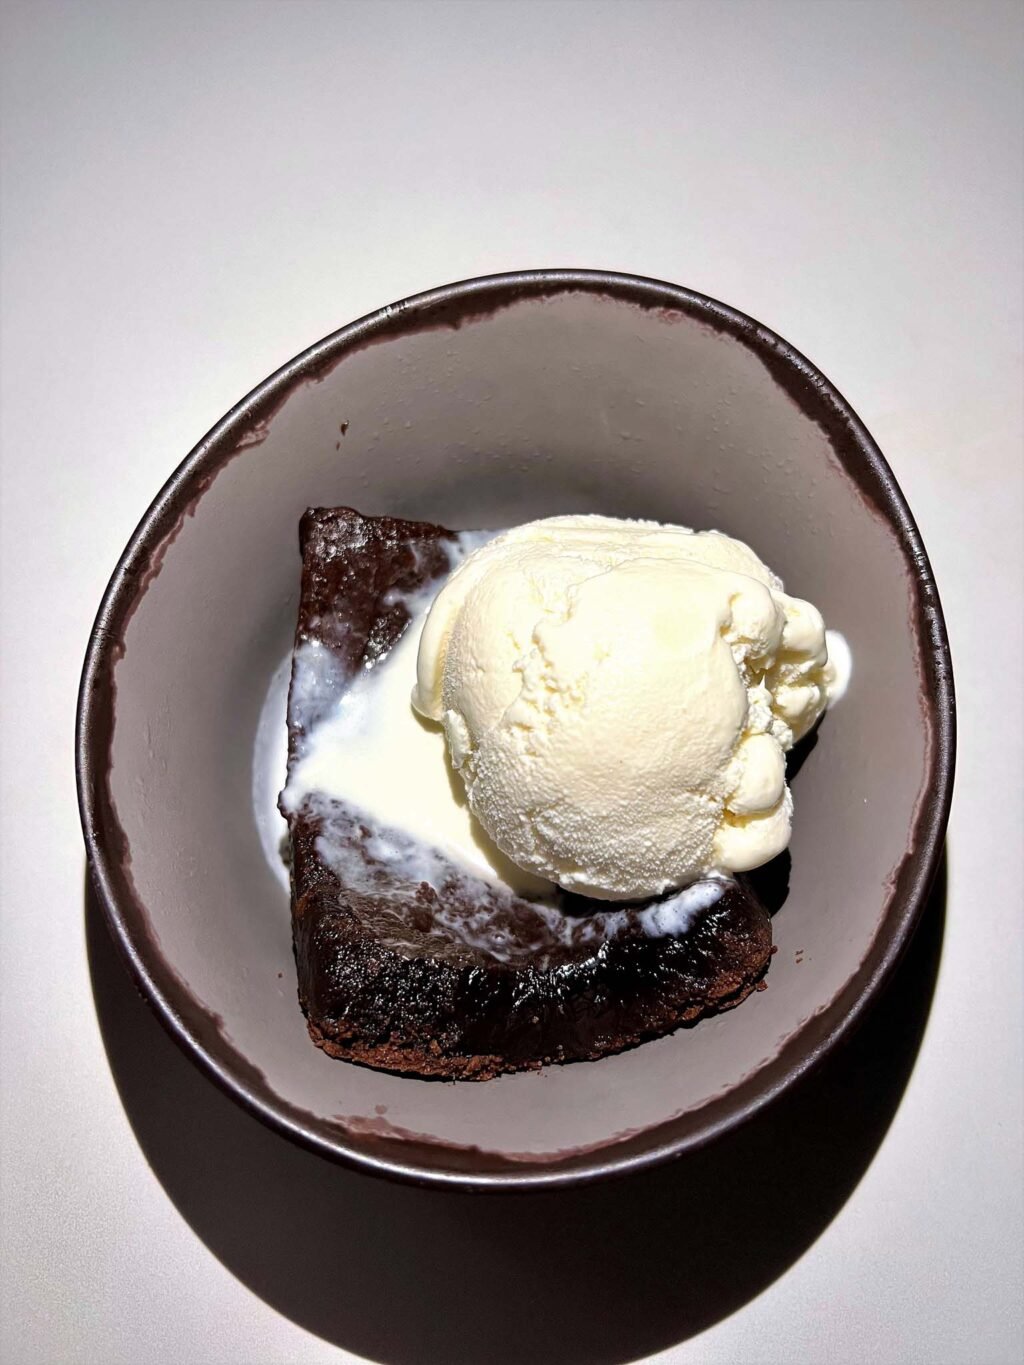 Brownie - I|O Rooftop, The Godfrey Hotel Hollywood